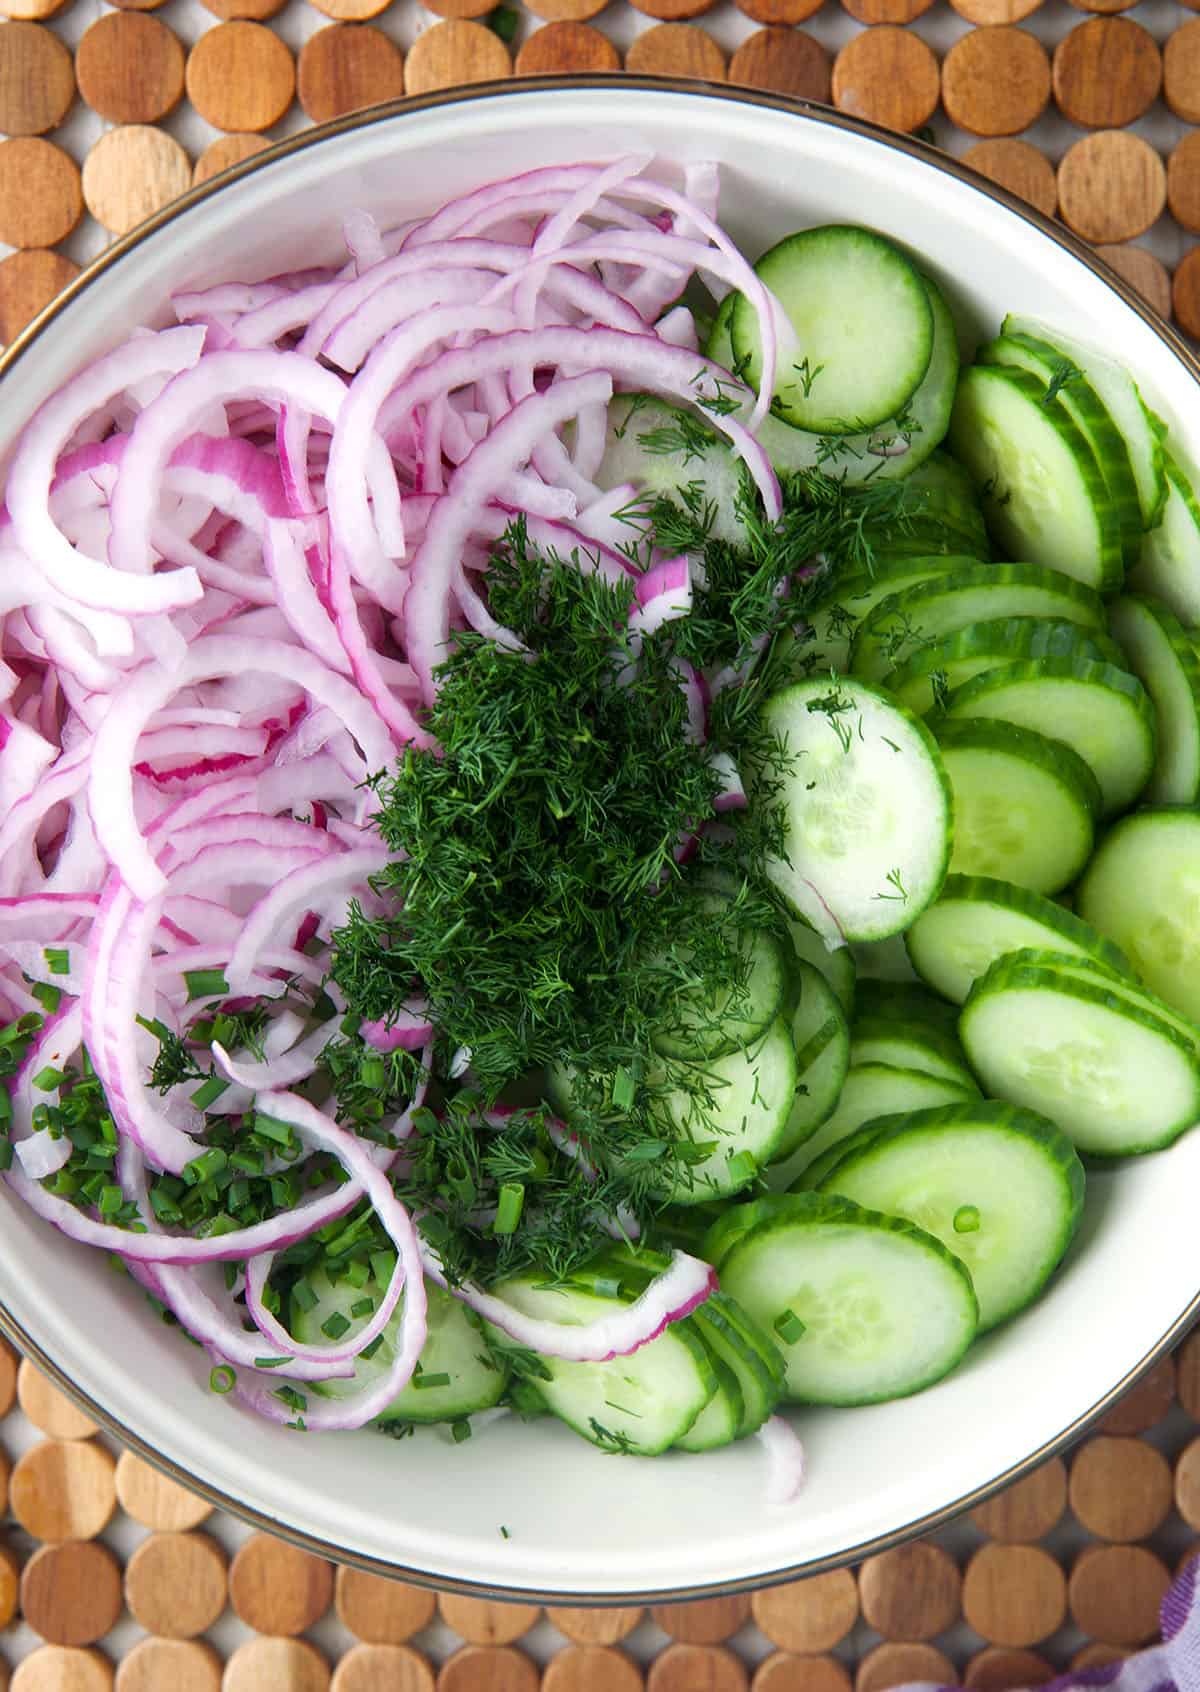 The ingredients for cucumber onion salad are placed in a bowl. 